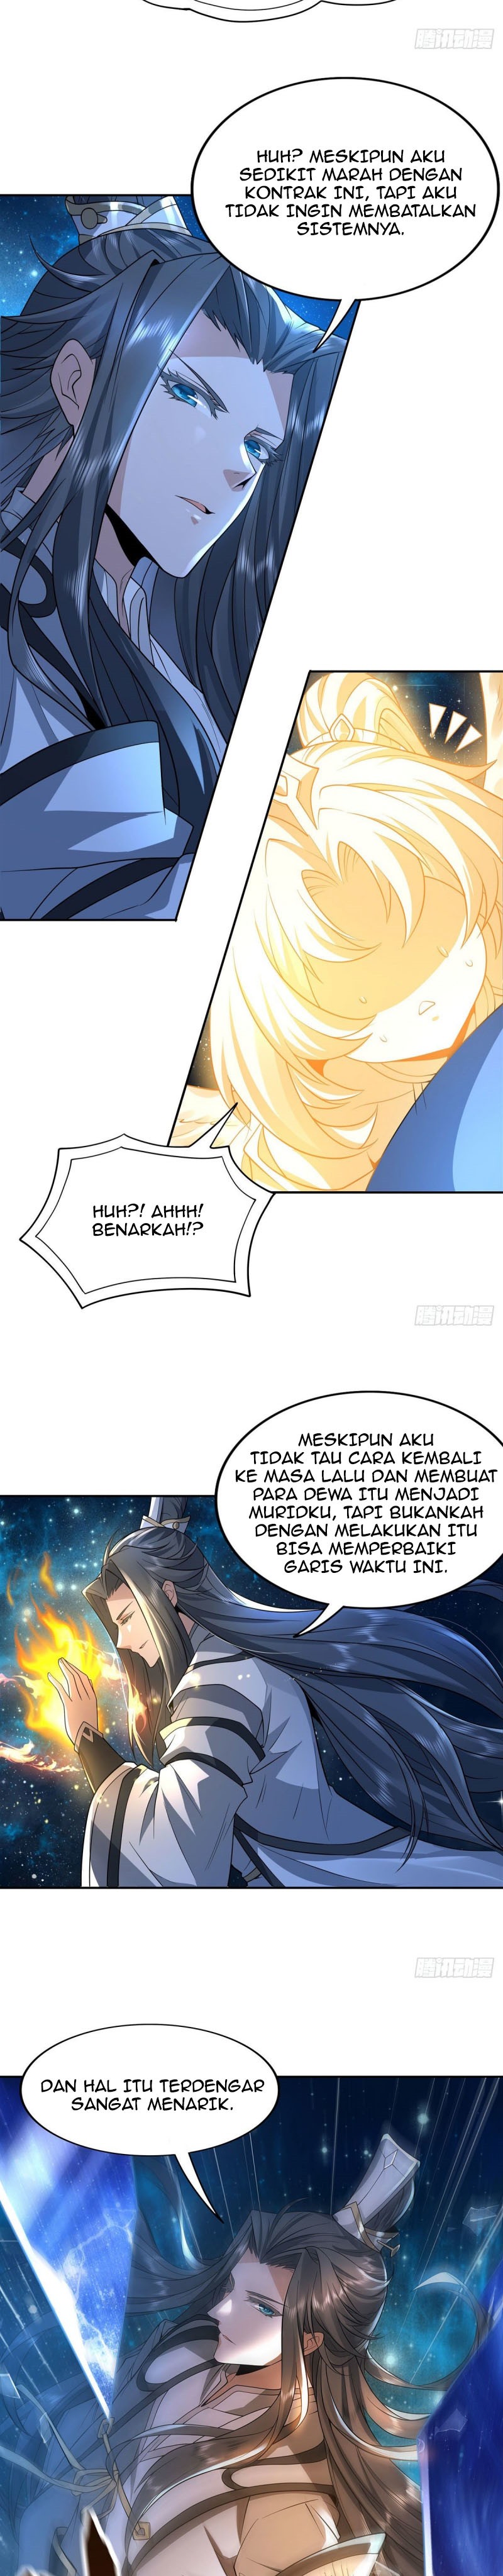 Dilarang COPAS - situs resmi www.mangacanblog.com - Komik my female apprentices are all big shots from the future 000 - chapter 0 1 Indonesia my female apprentices are all big shots from the future 000 - chapter 0 Terbaru 19|Baca Manga Komik Indonesia|Mangacan